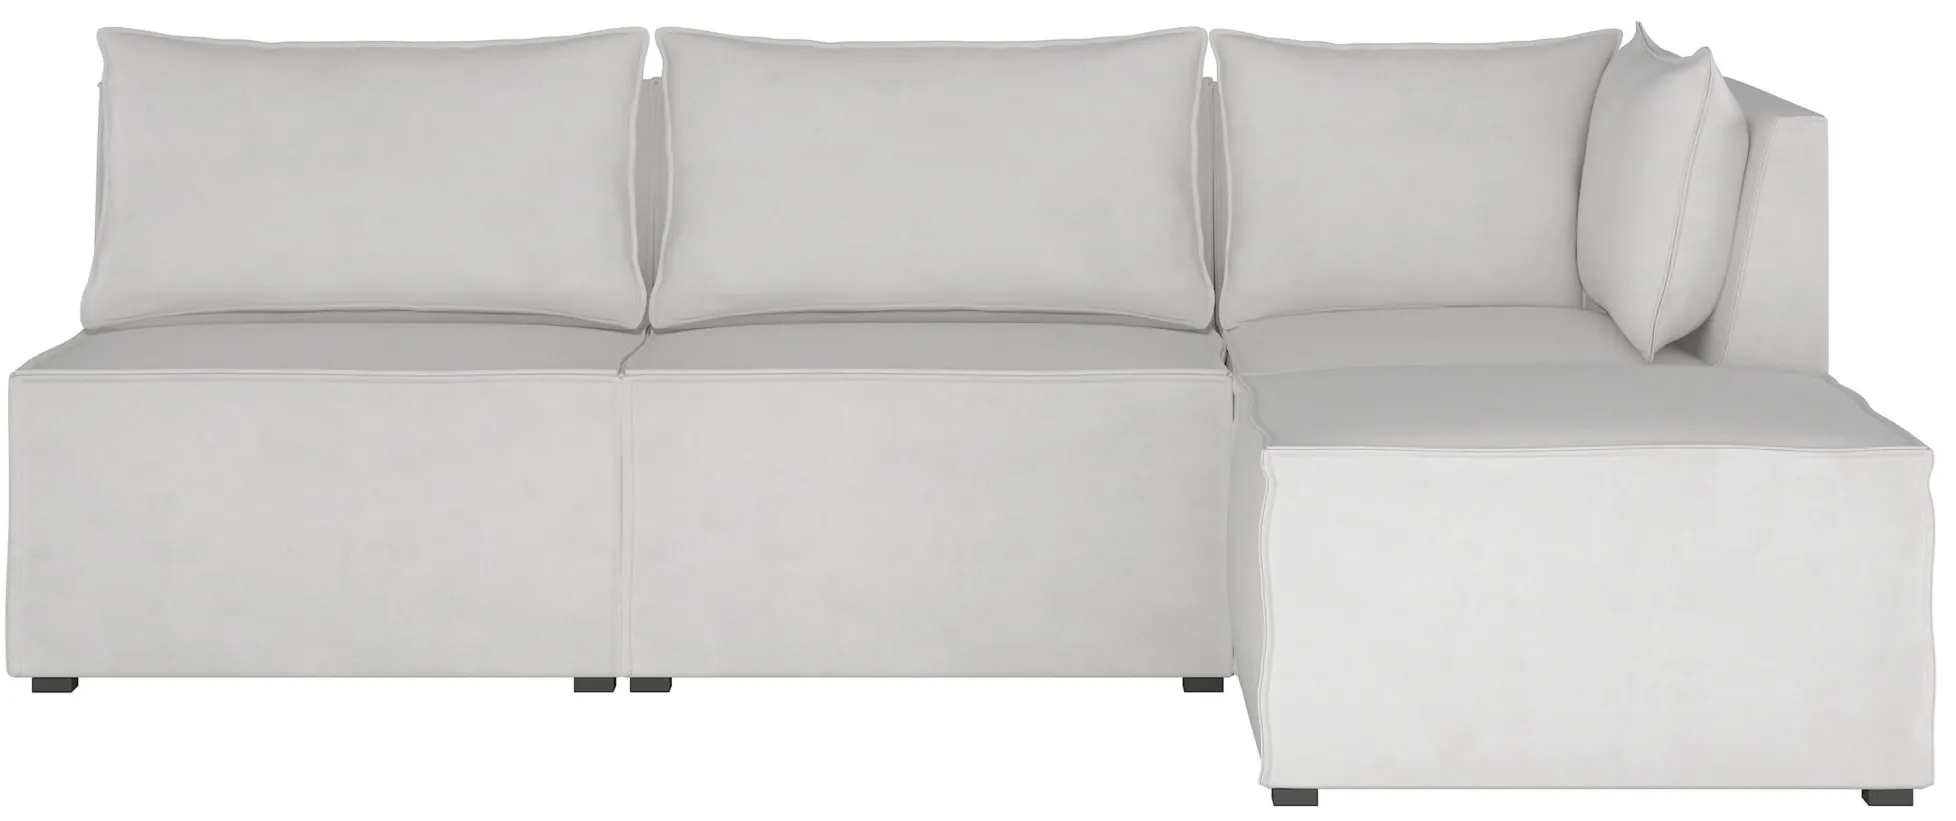 Stacy III 4-pc. Right Hand Facing Sectional Sofa in Velvet White by Skyline